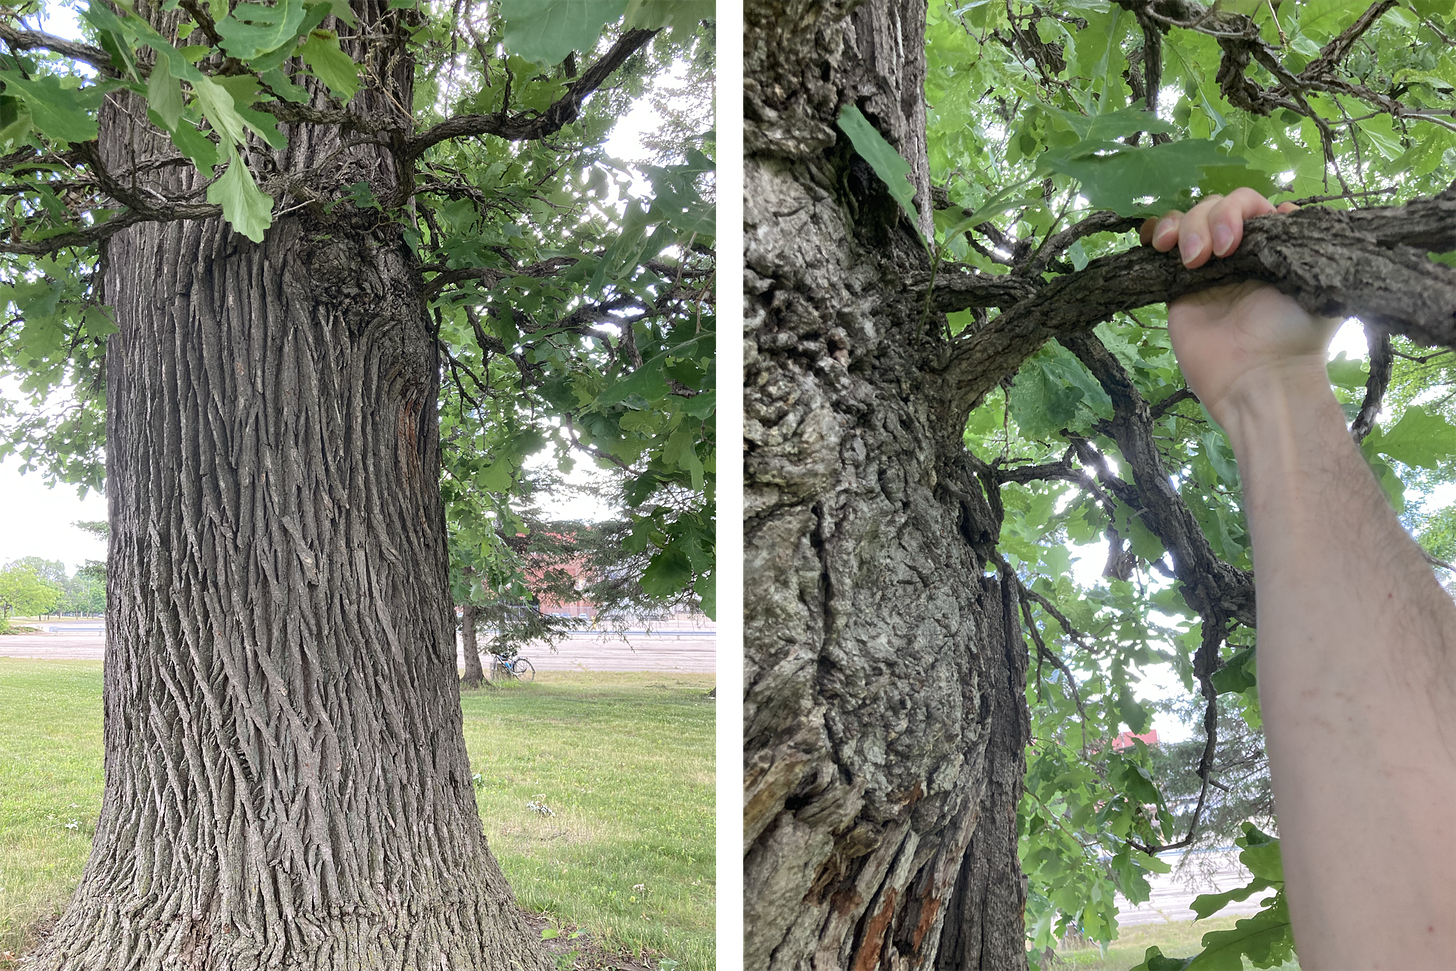 Two photos, side-by-side. One shows the small branches around the trunk of the tree. The other shows my hand grasping such a branch, for comparison of size.